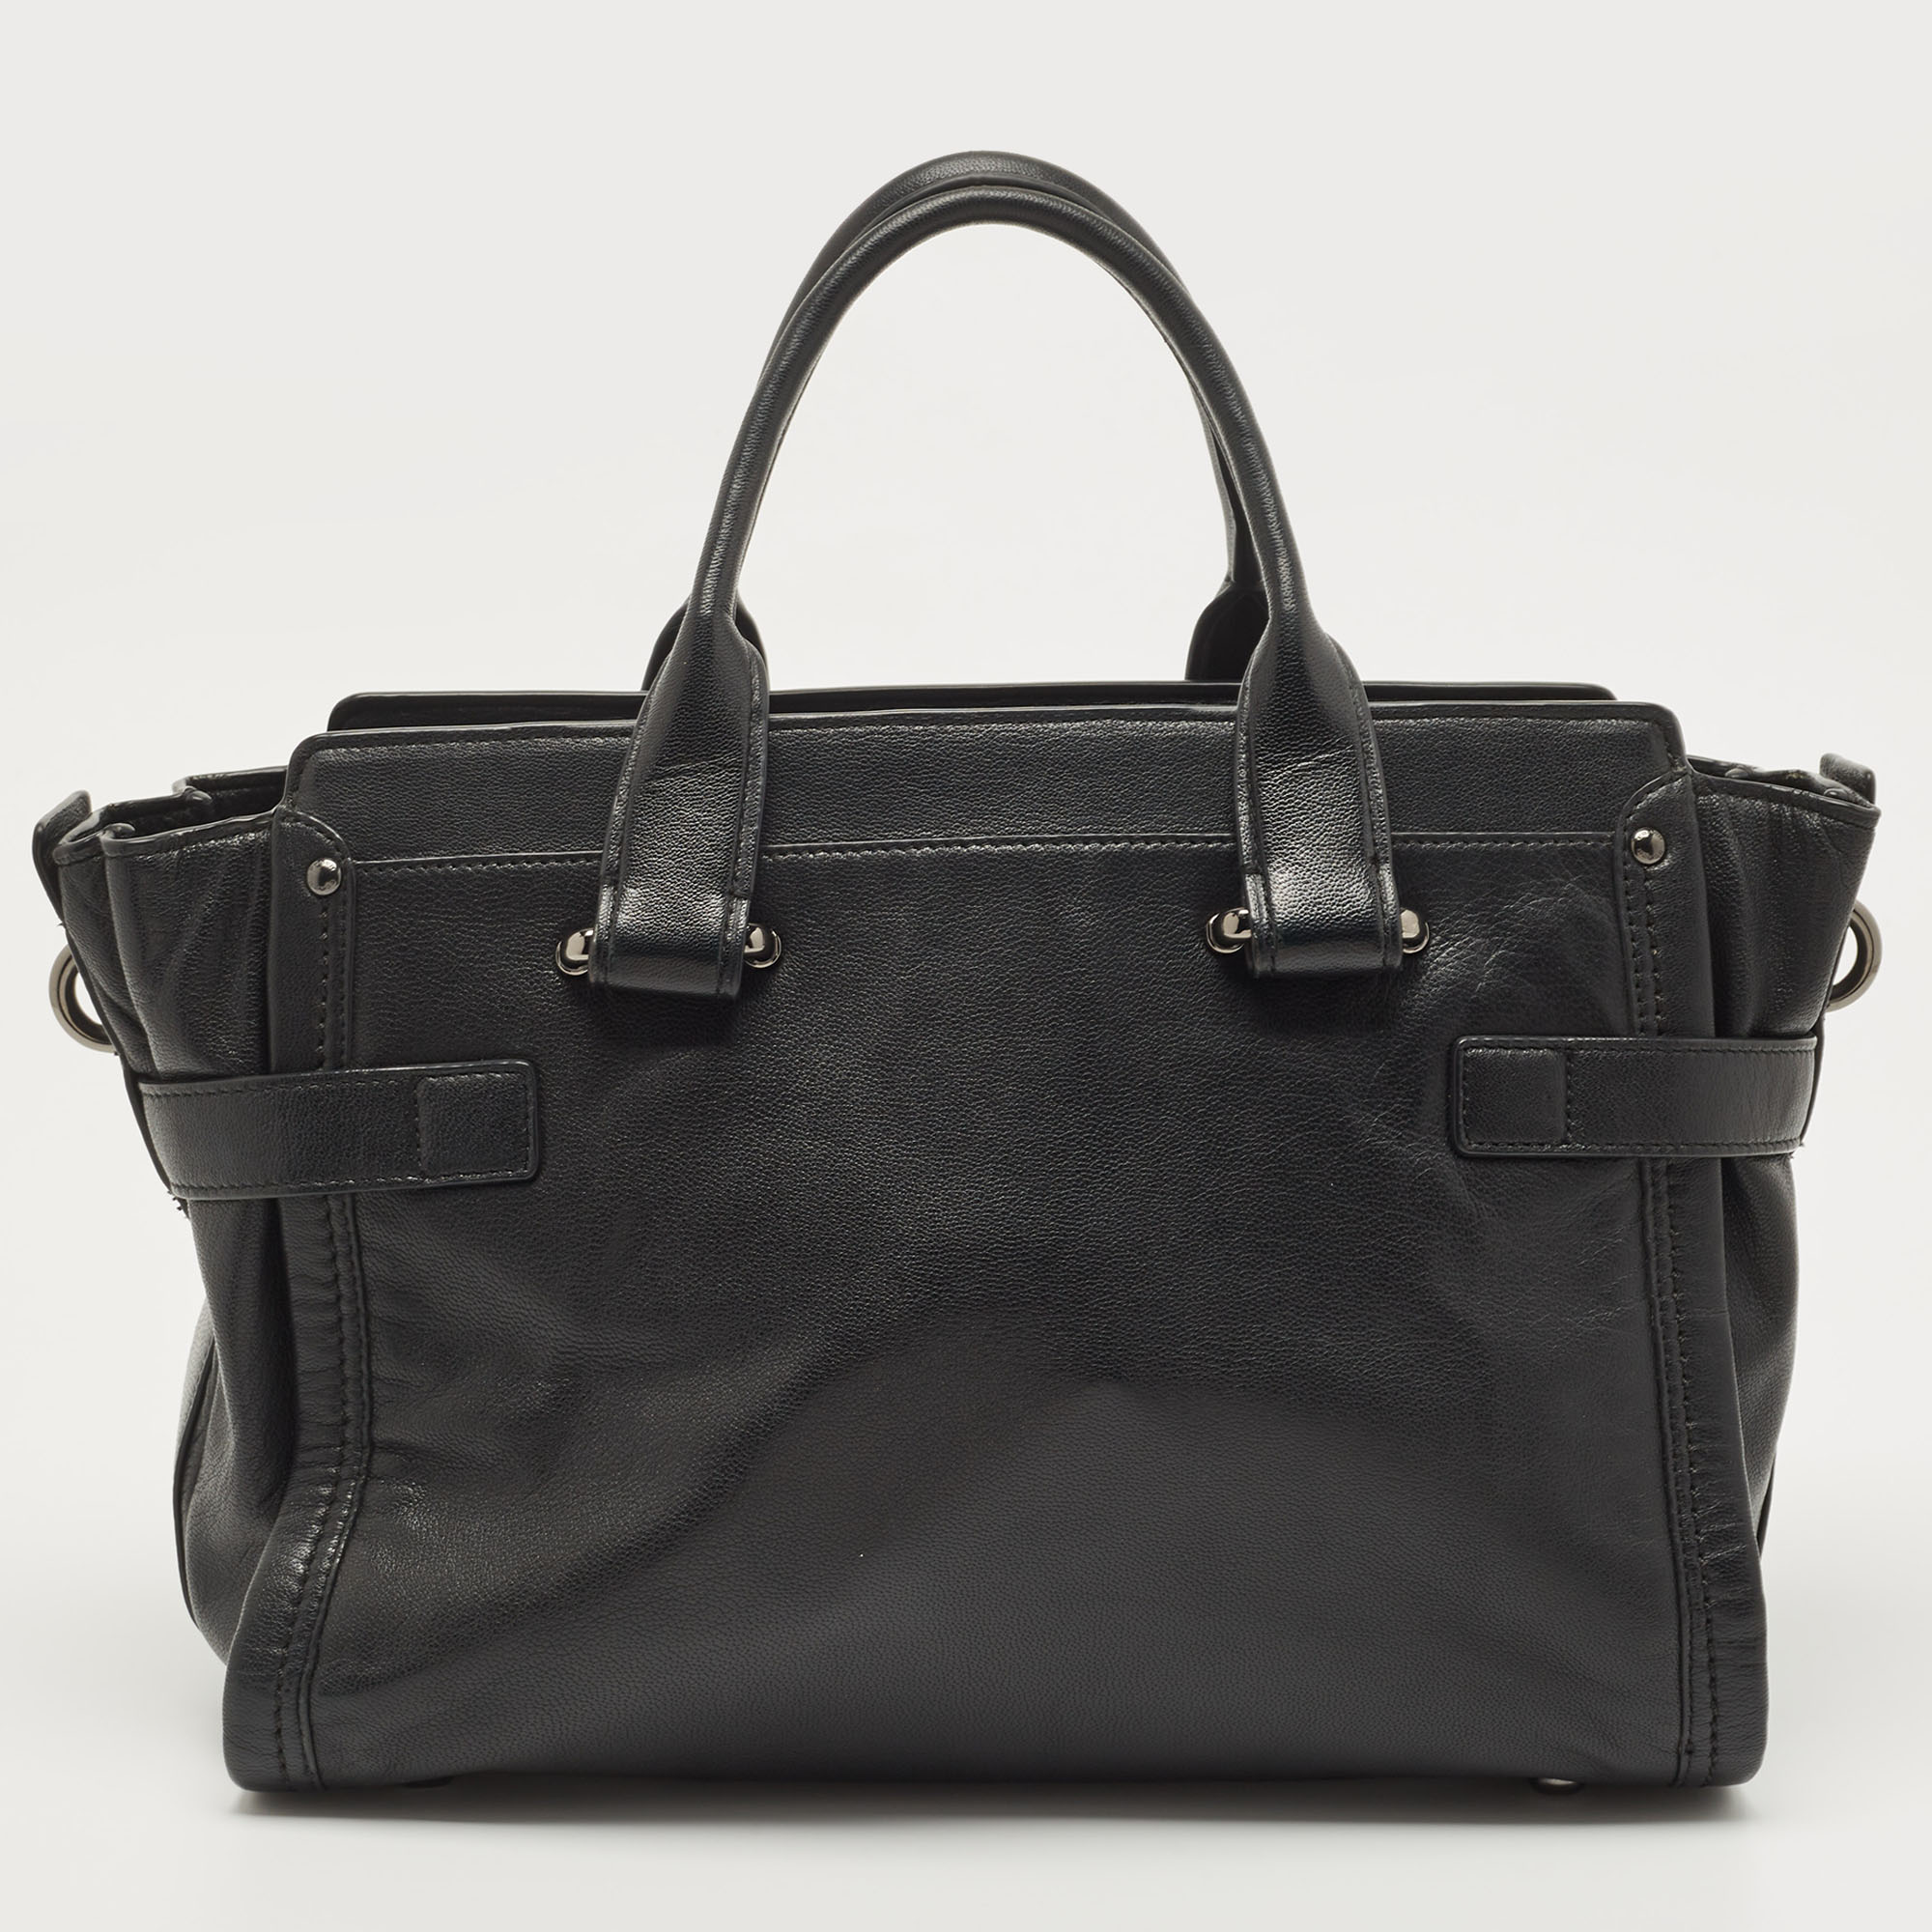 Coach Black Grained Leather Swagger 33 Tote